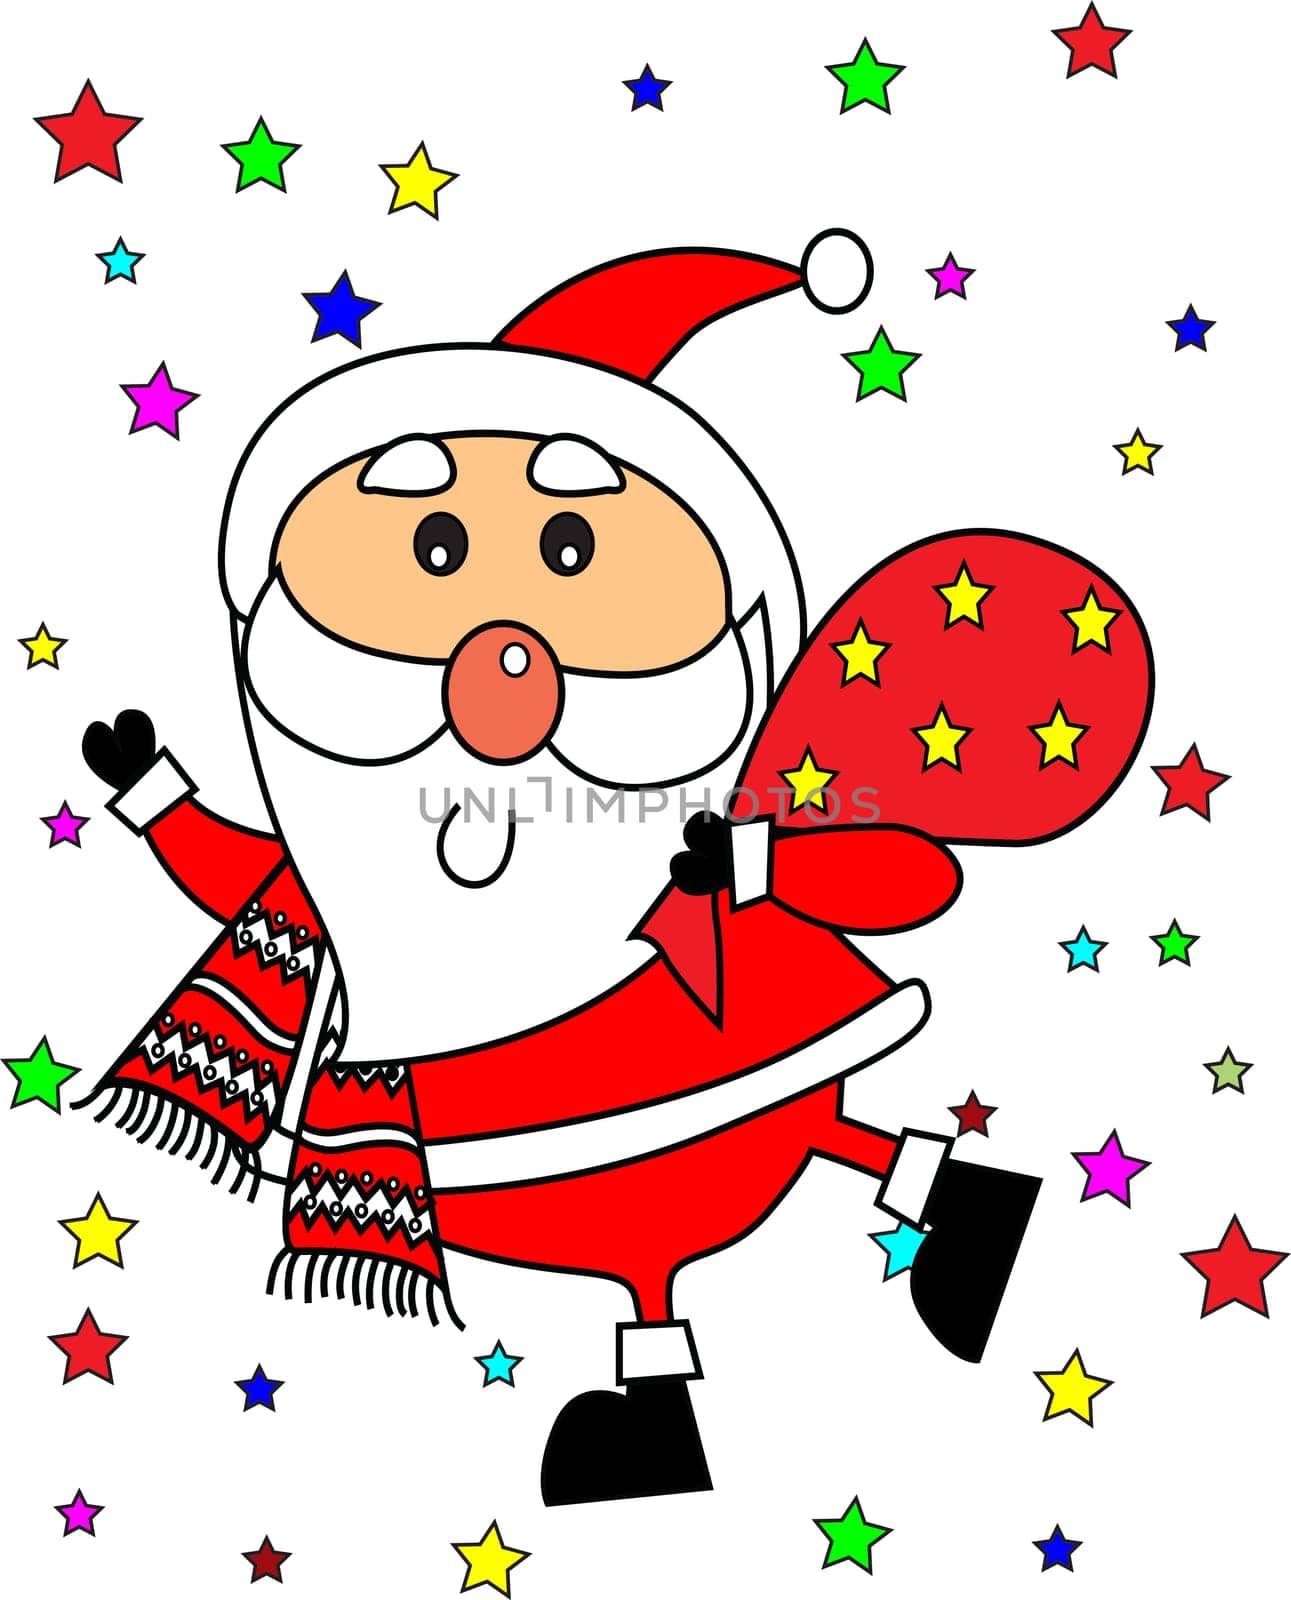 Santa Claus with a bag of presents surrounded with stars and other ornaments.